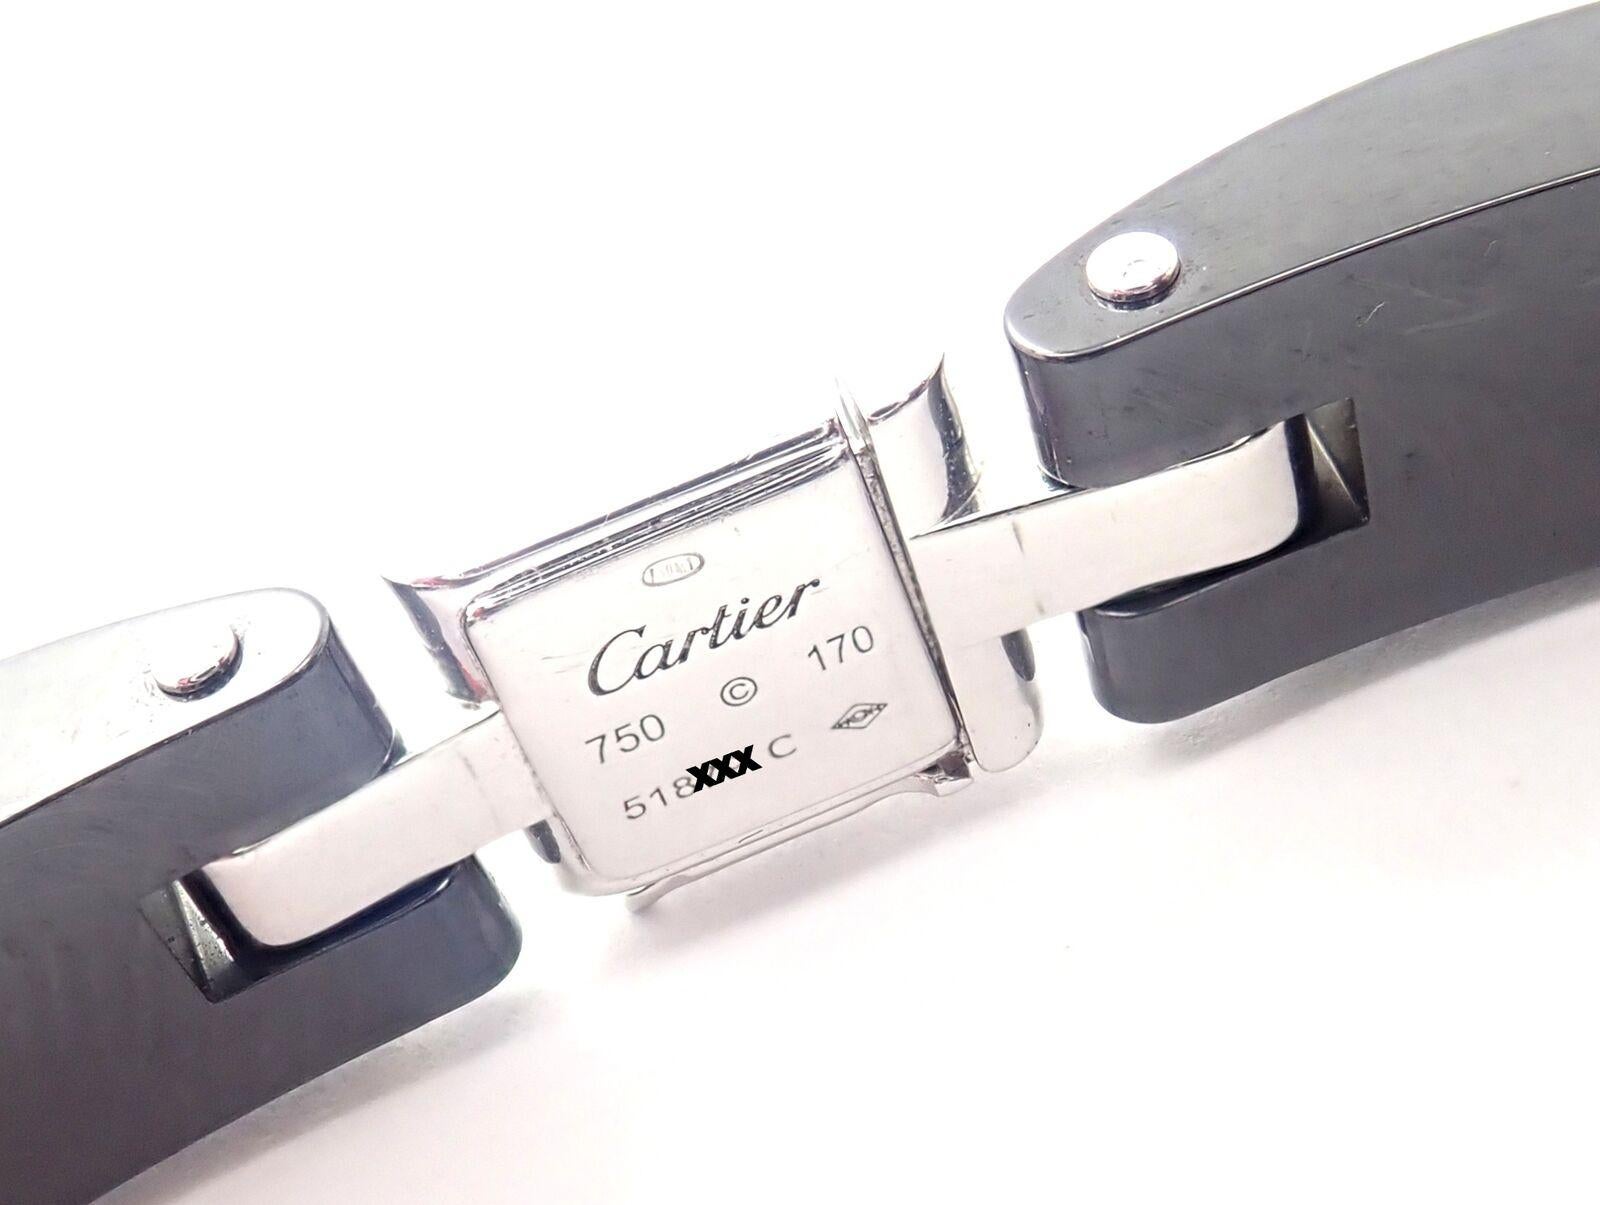 Cartier Maillon Panthere Diamond Ceramic White Gold Link Bracelet In Excellent Condition For Sale In Holland, PA